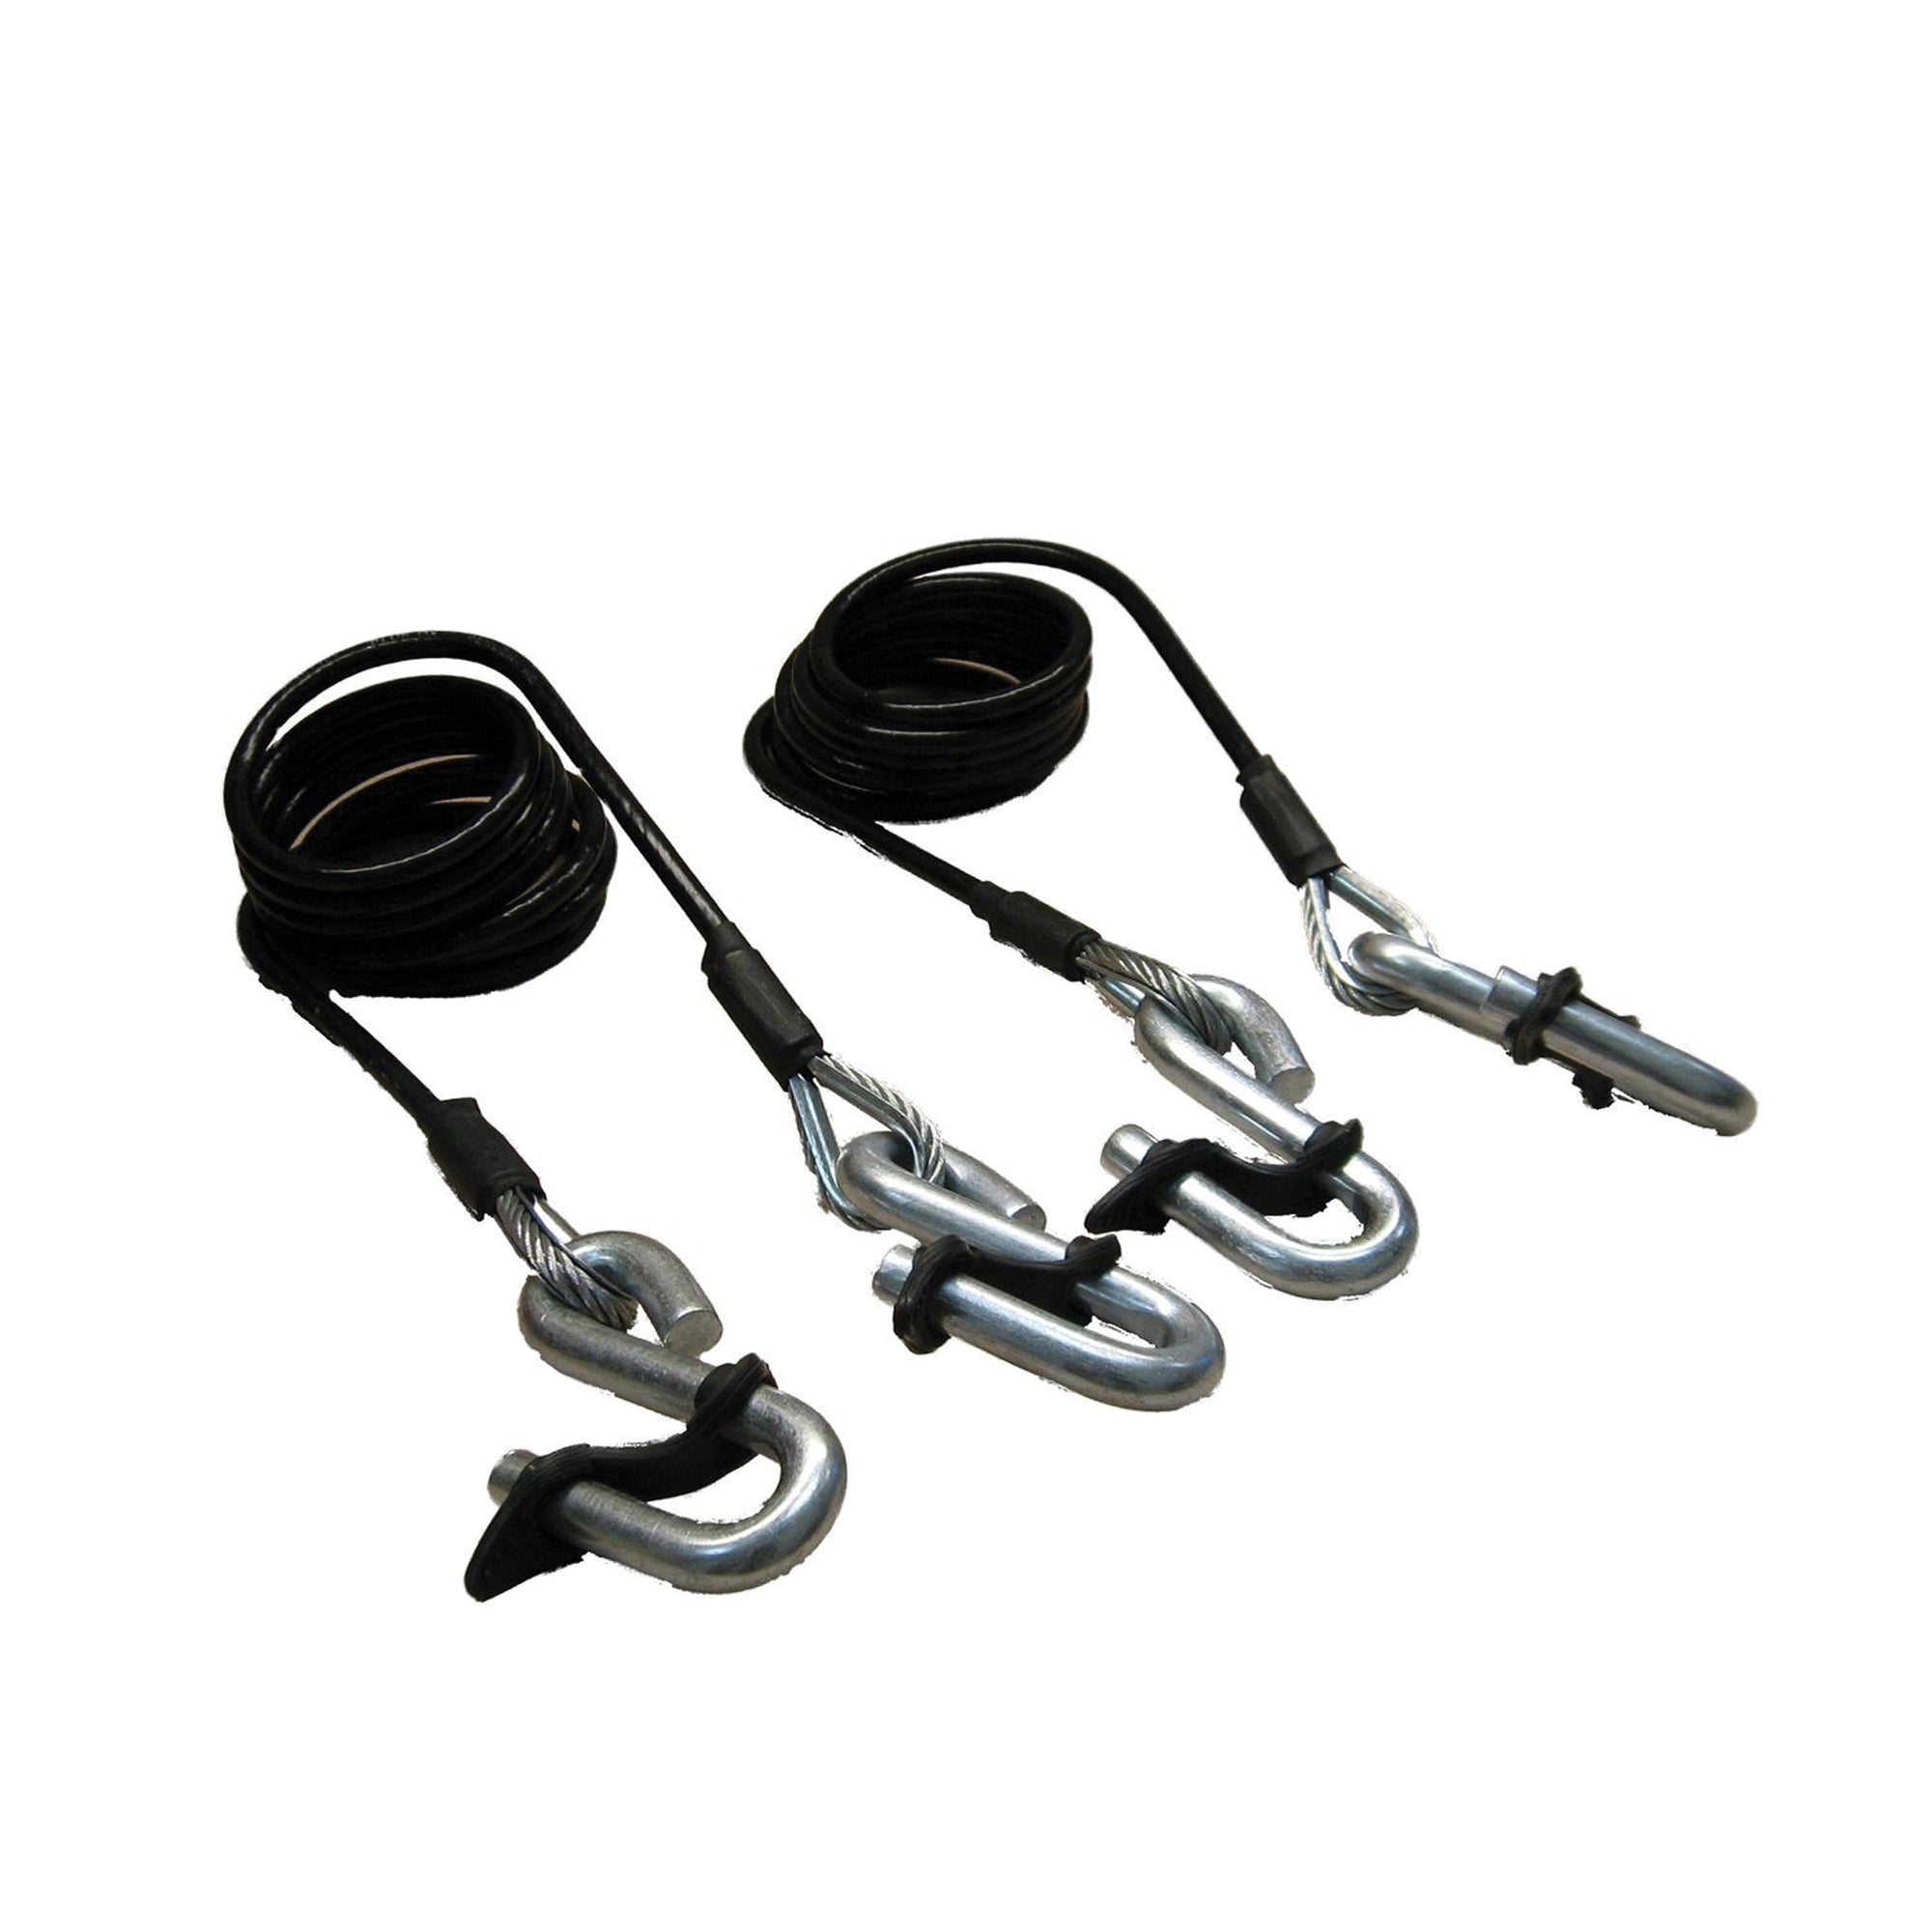 Blue Ox BX88196 Class III Safety Cable Kit - 7', 7500 lbs.